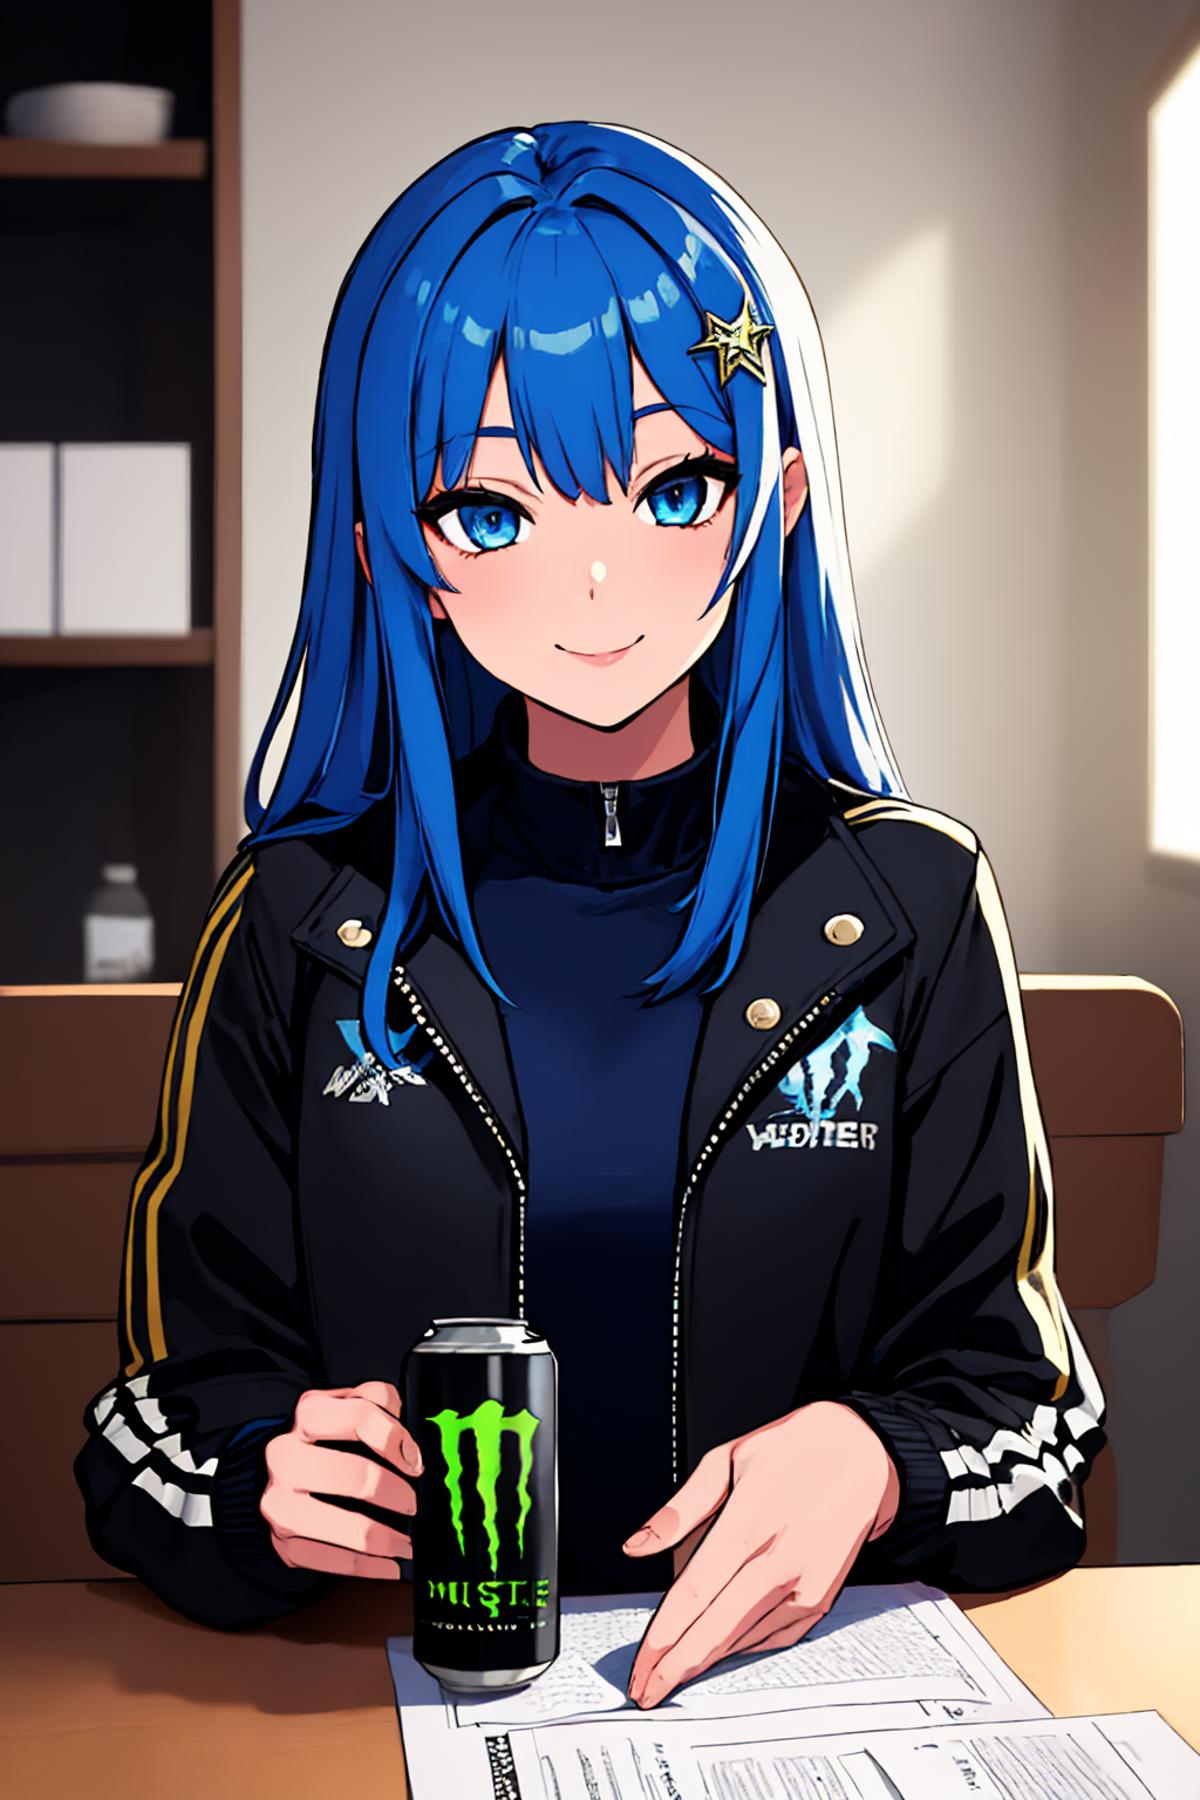 Holding Monster Energy | Concept LoRA image by justTNP